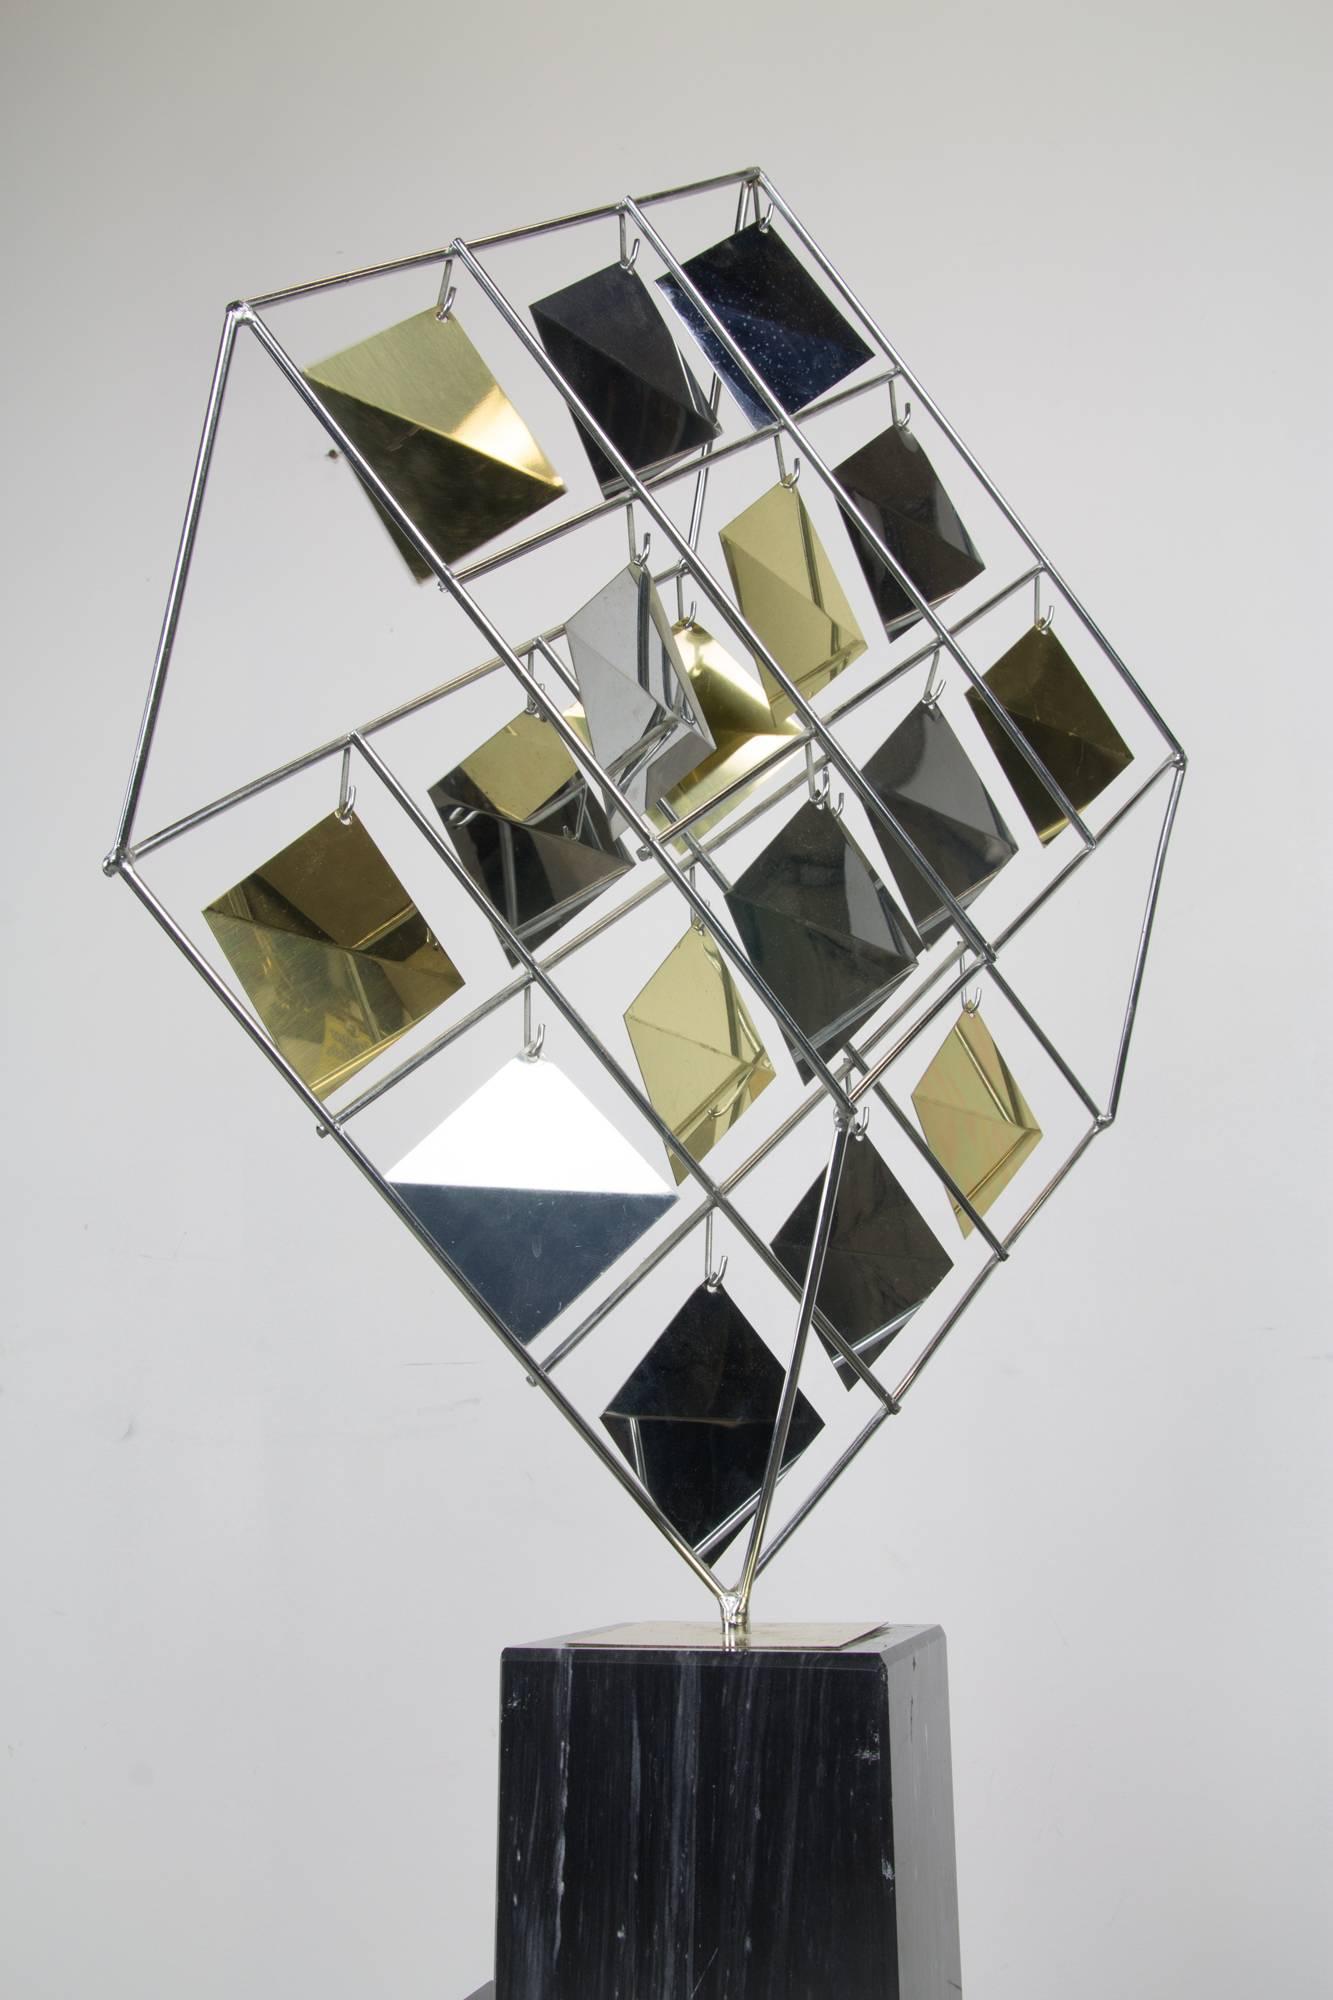 A scarce sculpture by Curtis Jere with two planes holding interchangeable brass and chrome squares, creating the optical effect of a suspended cube. The sculpture sits in a rectangular marble base. Full width is 18.5 in.